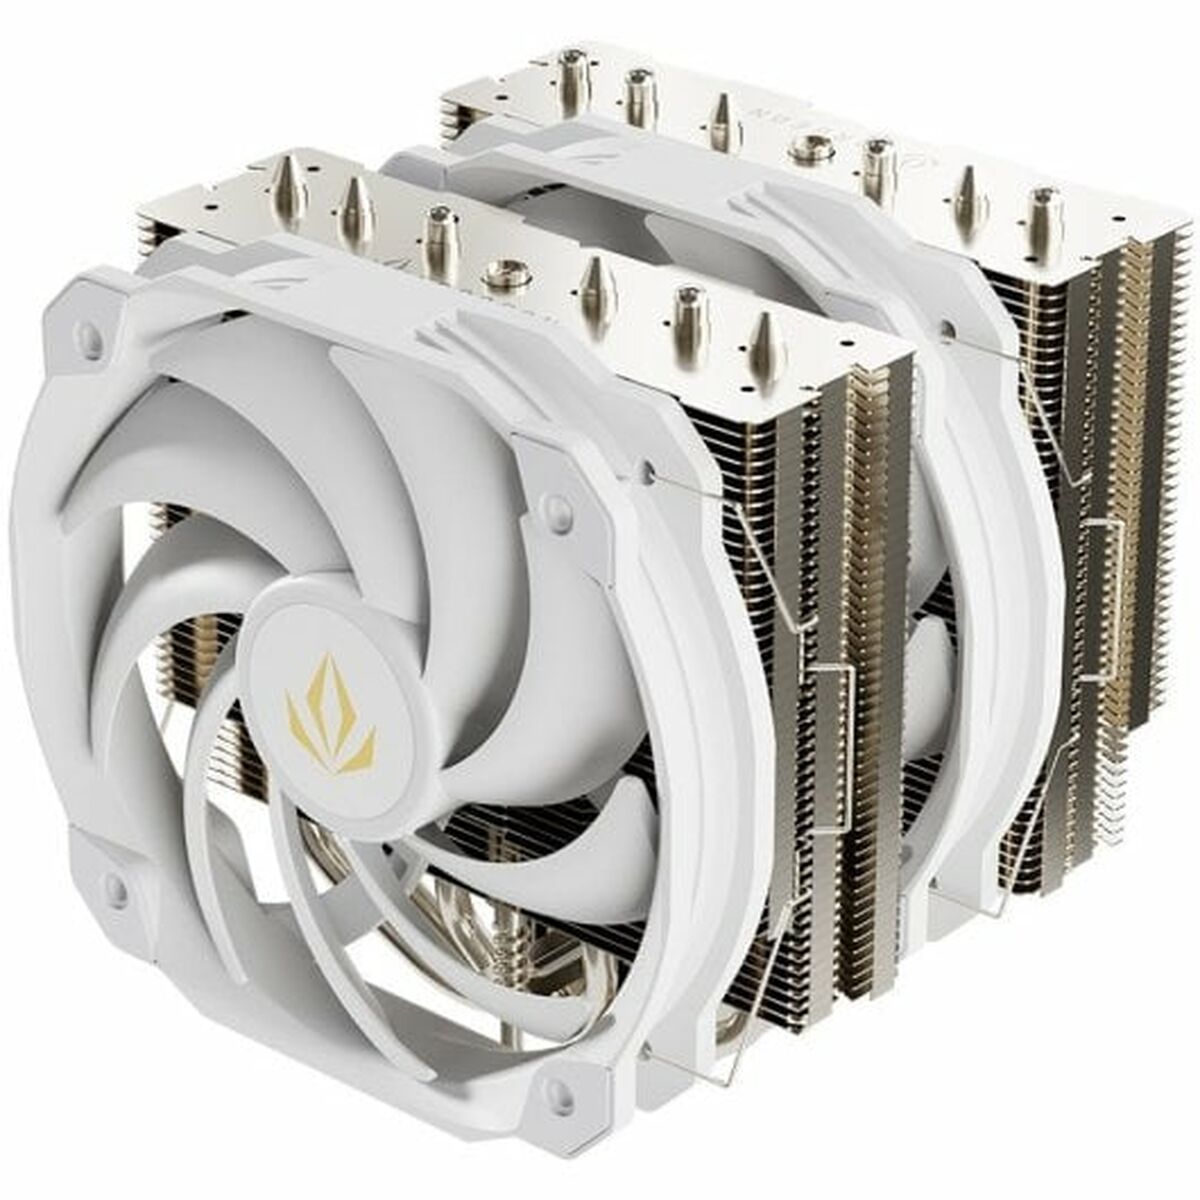 CPU Fan Forgeon, Forgeon, Computing, Components, cpu-fan-forgeon-2, Brand_Forgeon, category-reference-2609, category-reference-2803, category-reference-2815, category-reference-t-19685, category-reference-t-19912, category-reference-t-21360, category-reference-t-25668, category-reference-t-29842, computers / components, Condition_NEW, Price_300 - 400, Teleworking, RiotNook